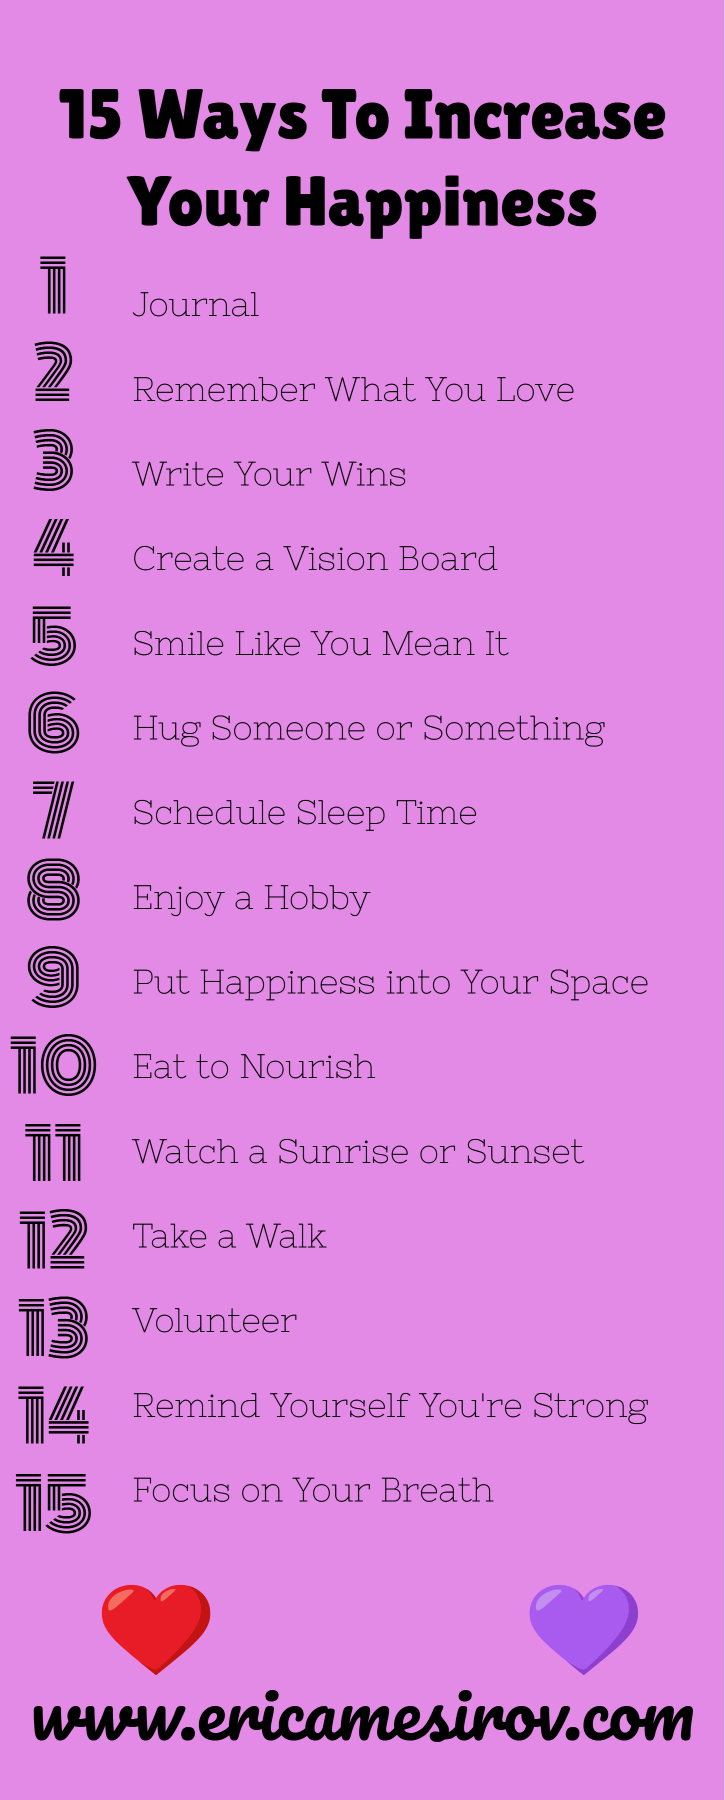 15 Ways to Increase Your Happiness - Eat. Lose. Gain.